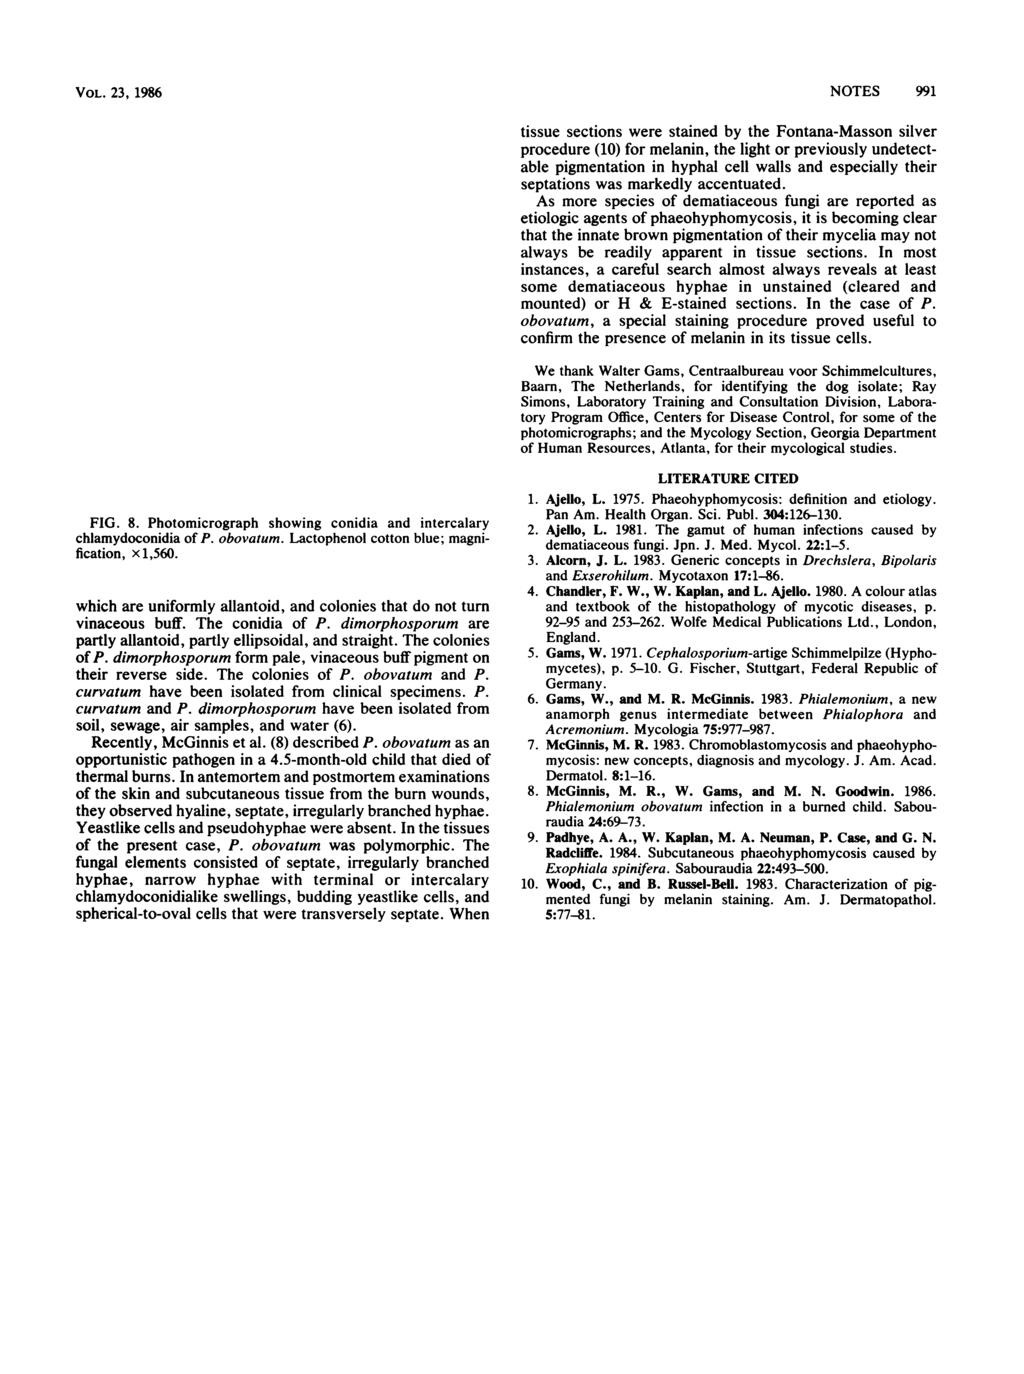 VOL. 23, 1986 FIG. 8. Photomicrograph showing conidia and intercalary chlamydoconidia of P. obovatum. Lactophenol cotton blue; magnification, x 1,560.